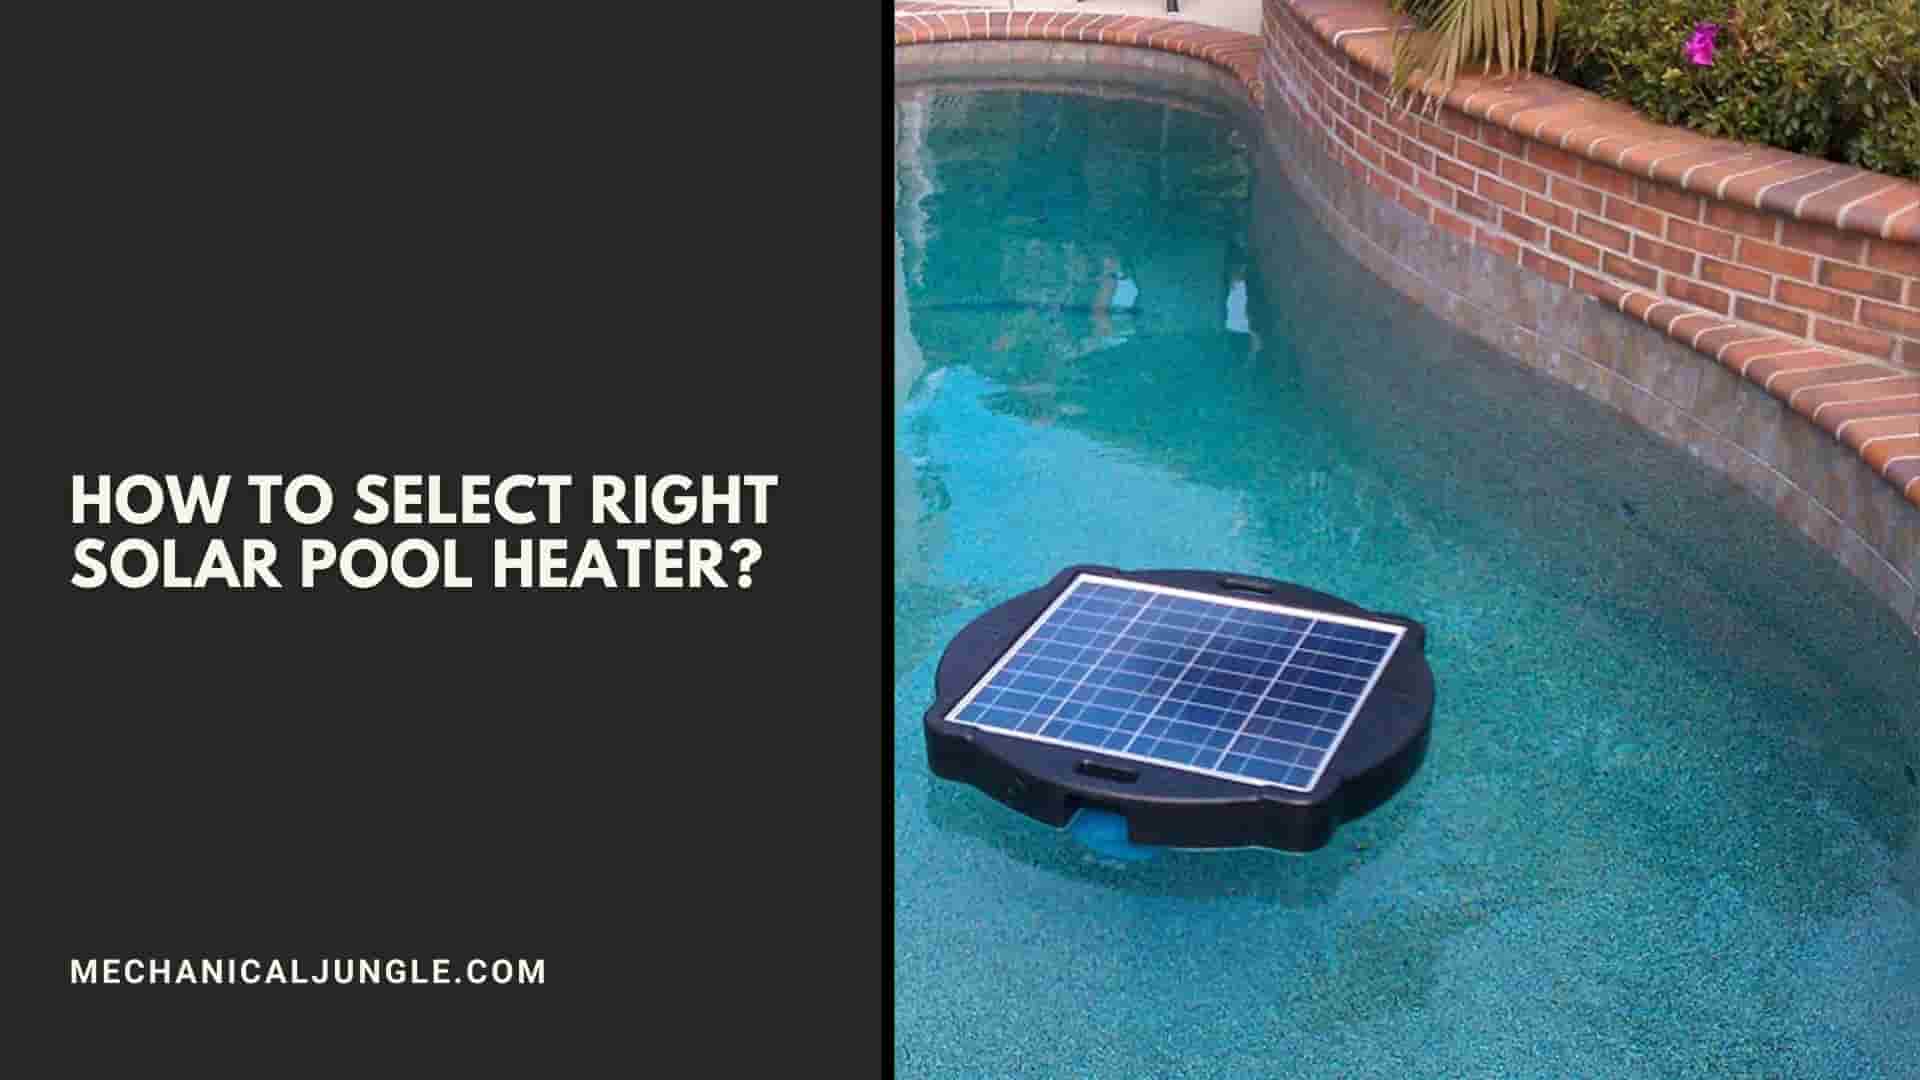 How to Select Right Solar Pool Heater?